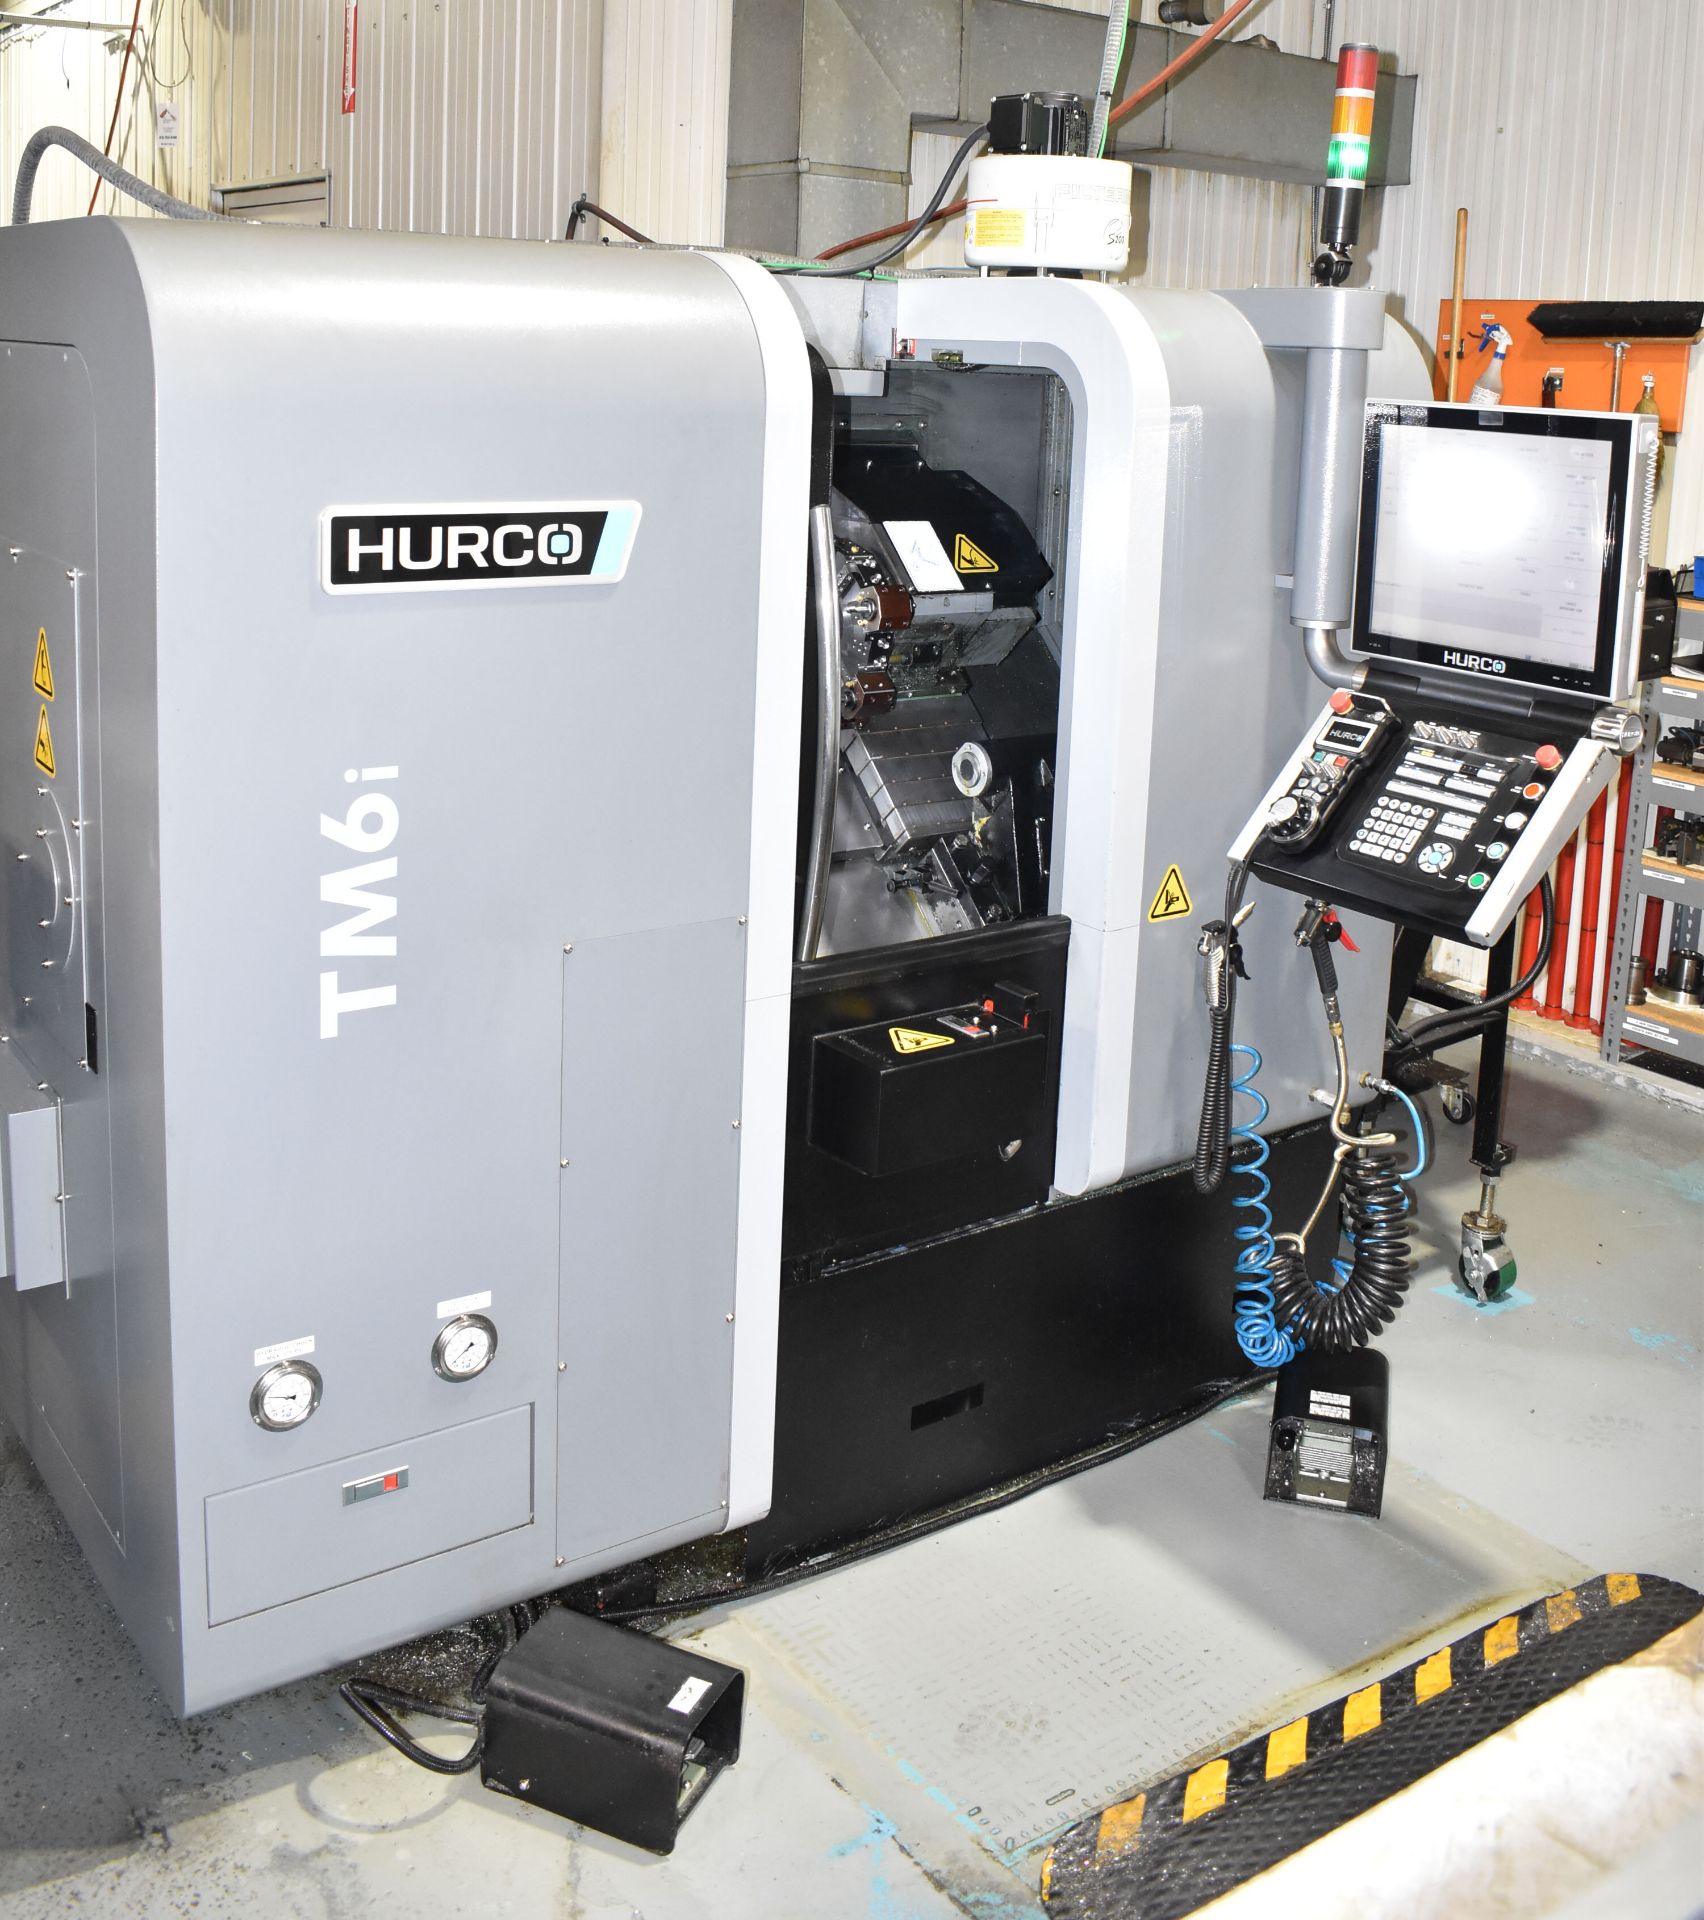 HURCO (INSTALLED NEW IN 2018) TM6I CNC TURNING CENTER WITH HURCO CNC CONTROL, 9" HYDRAULIC CHUCK,